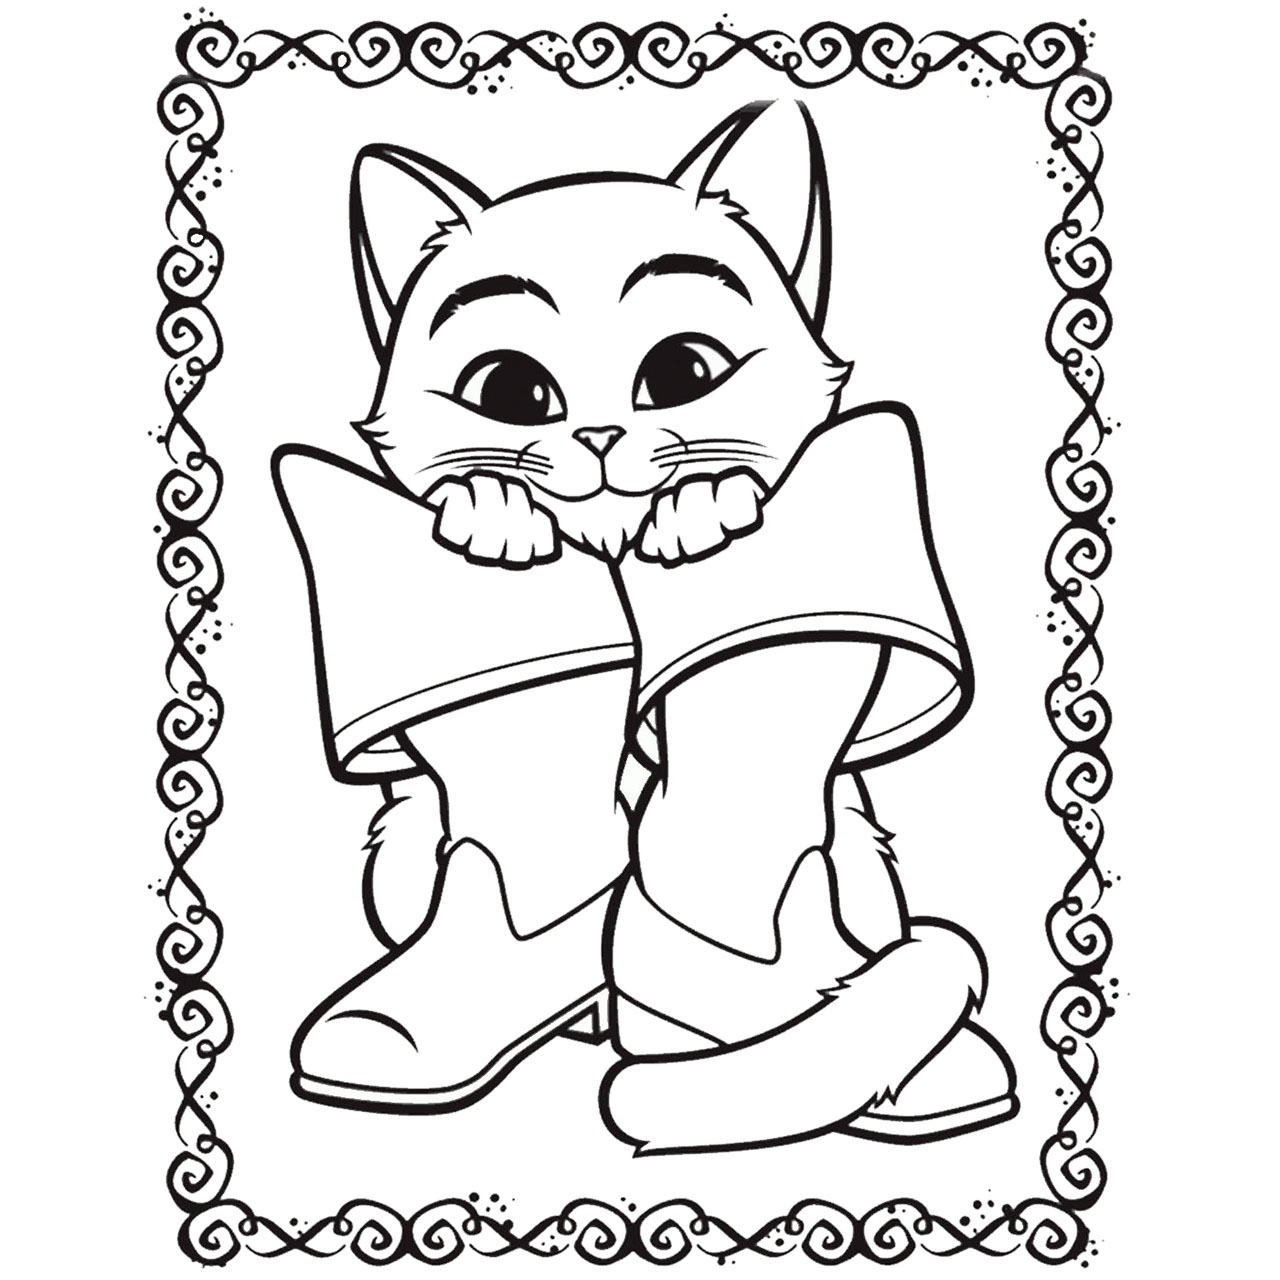 Free Puss in Boots Coloring Pages Kitten with Boots printable